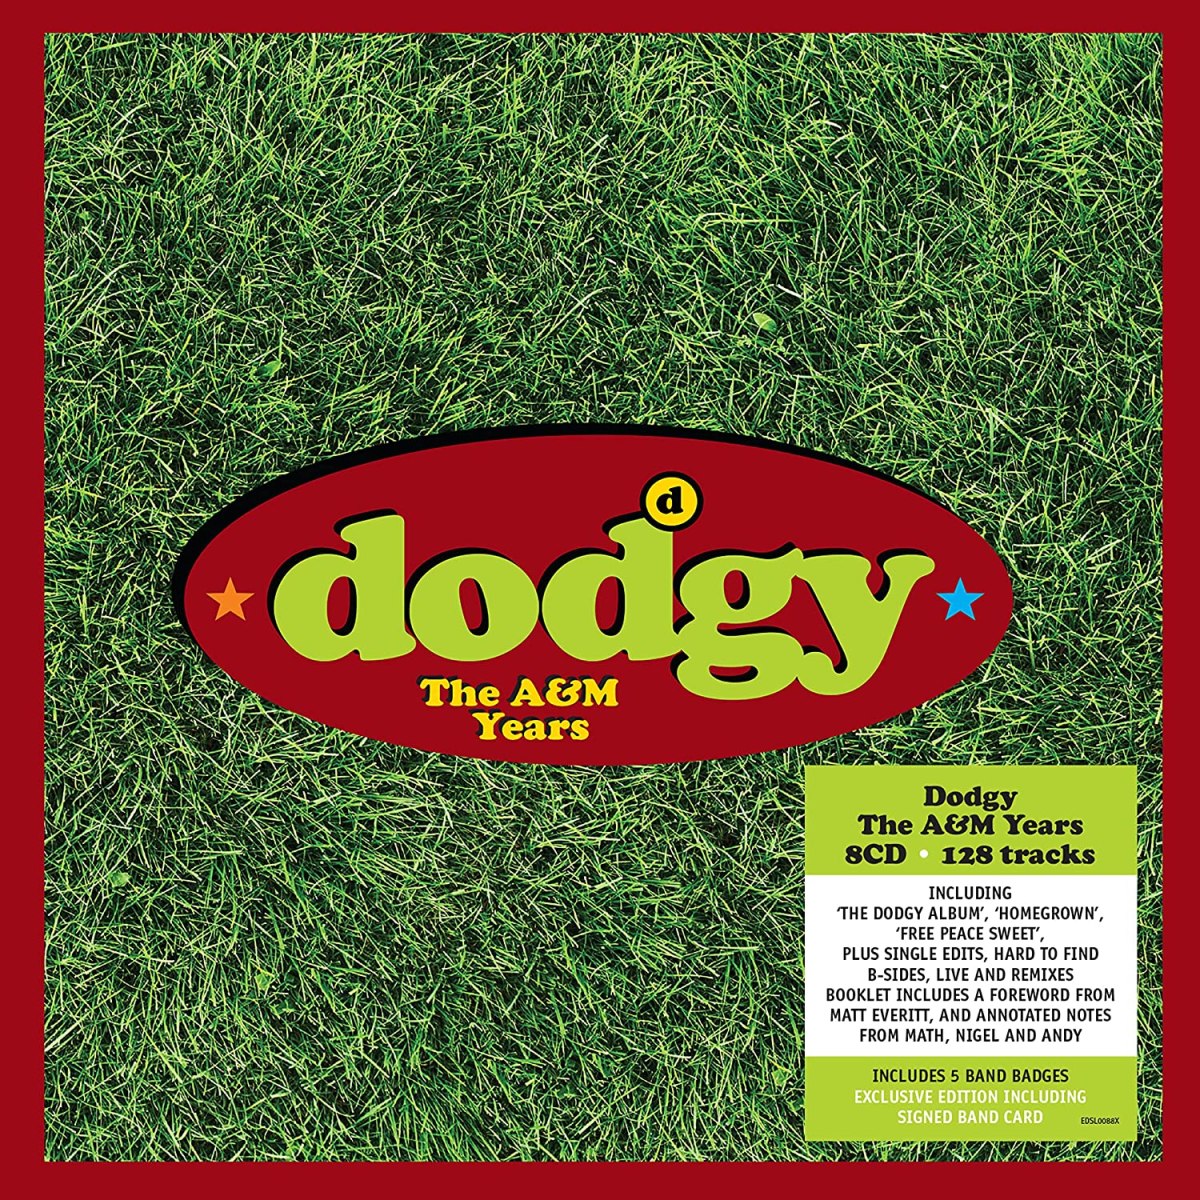 Dodgy – The A&M Years (Edsel)